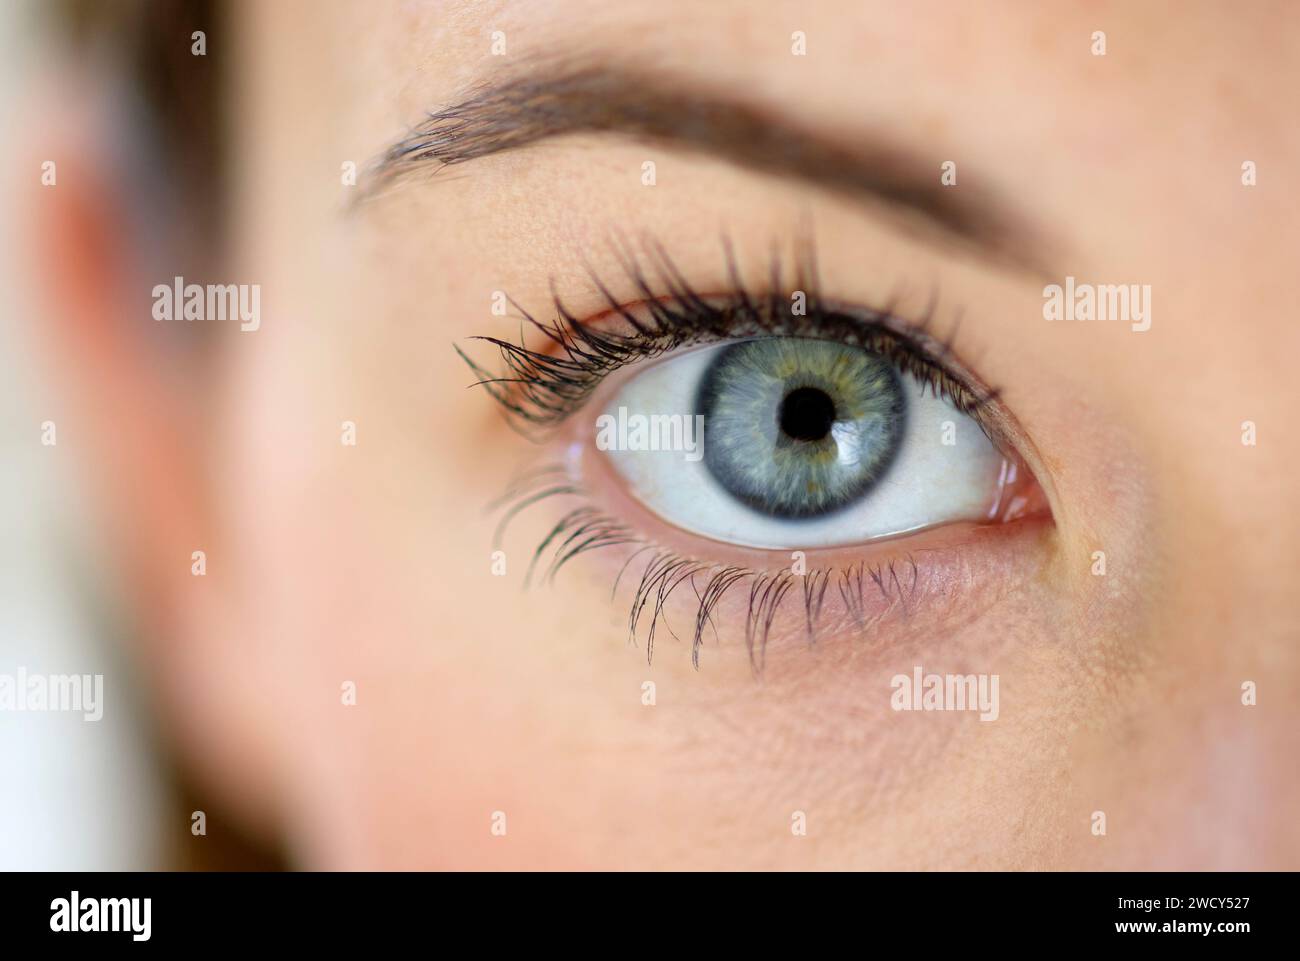 Womans eye close up Stock Photo